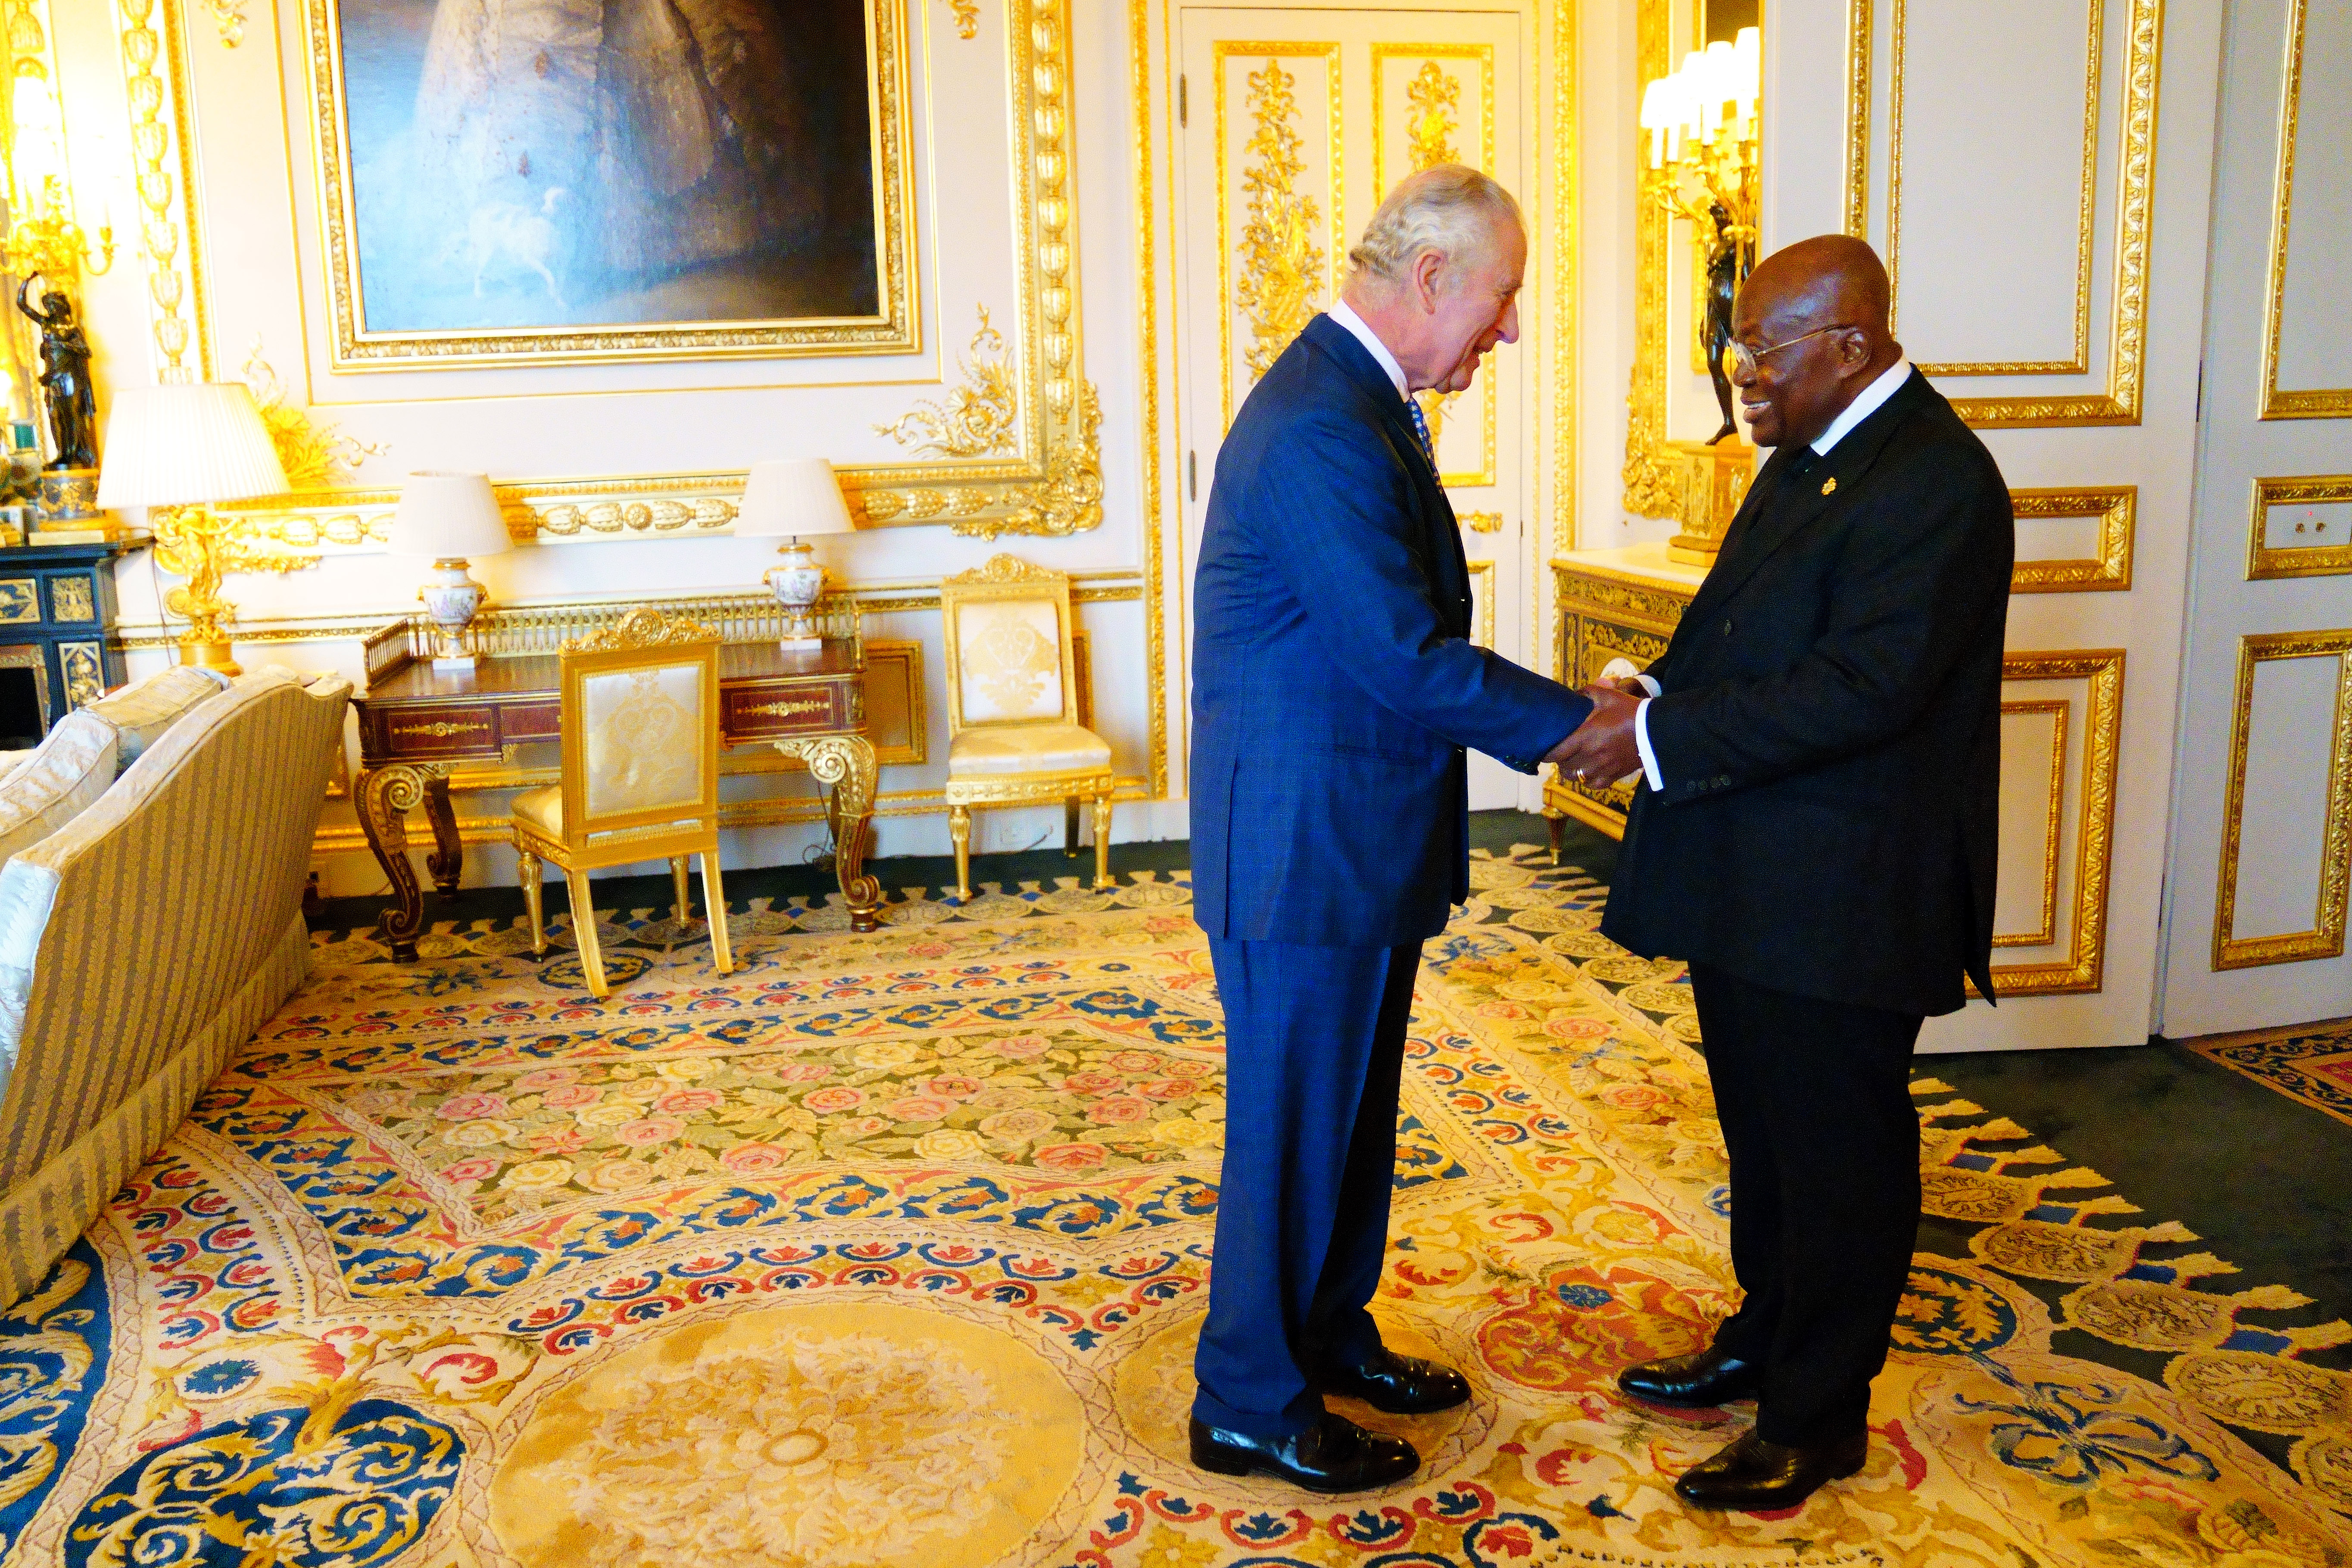 The King welcomes the President of Ghana to Windsor Castle